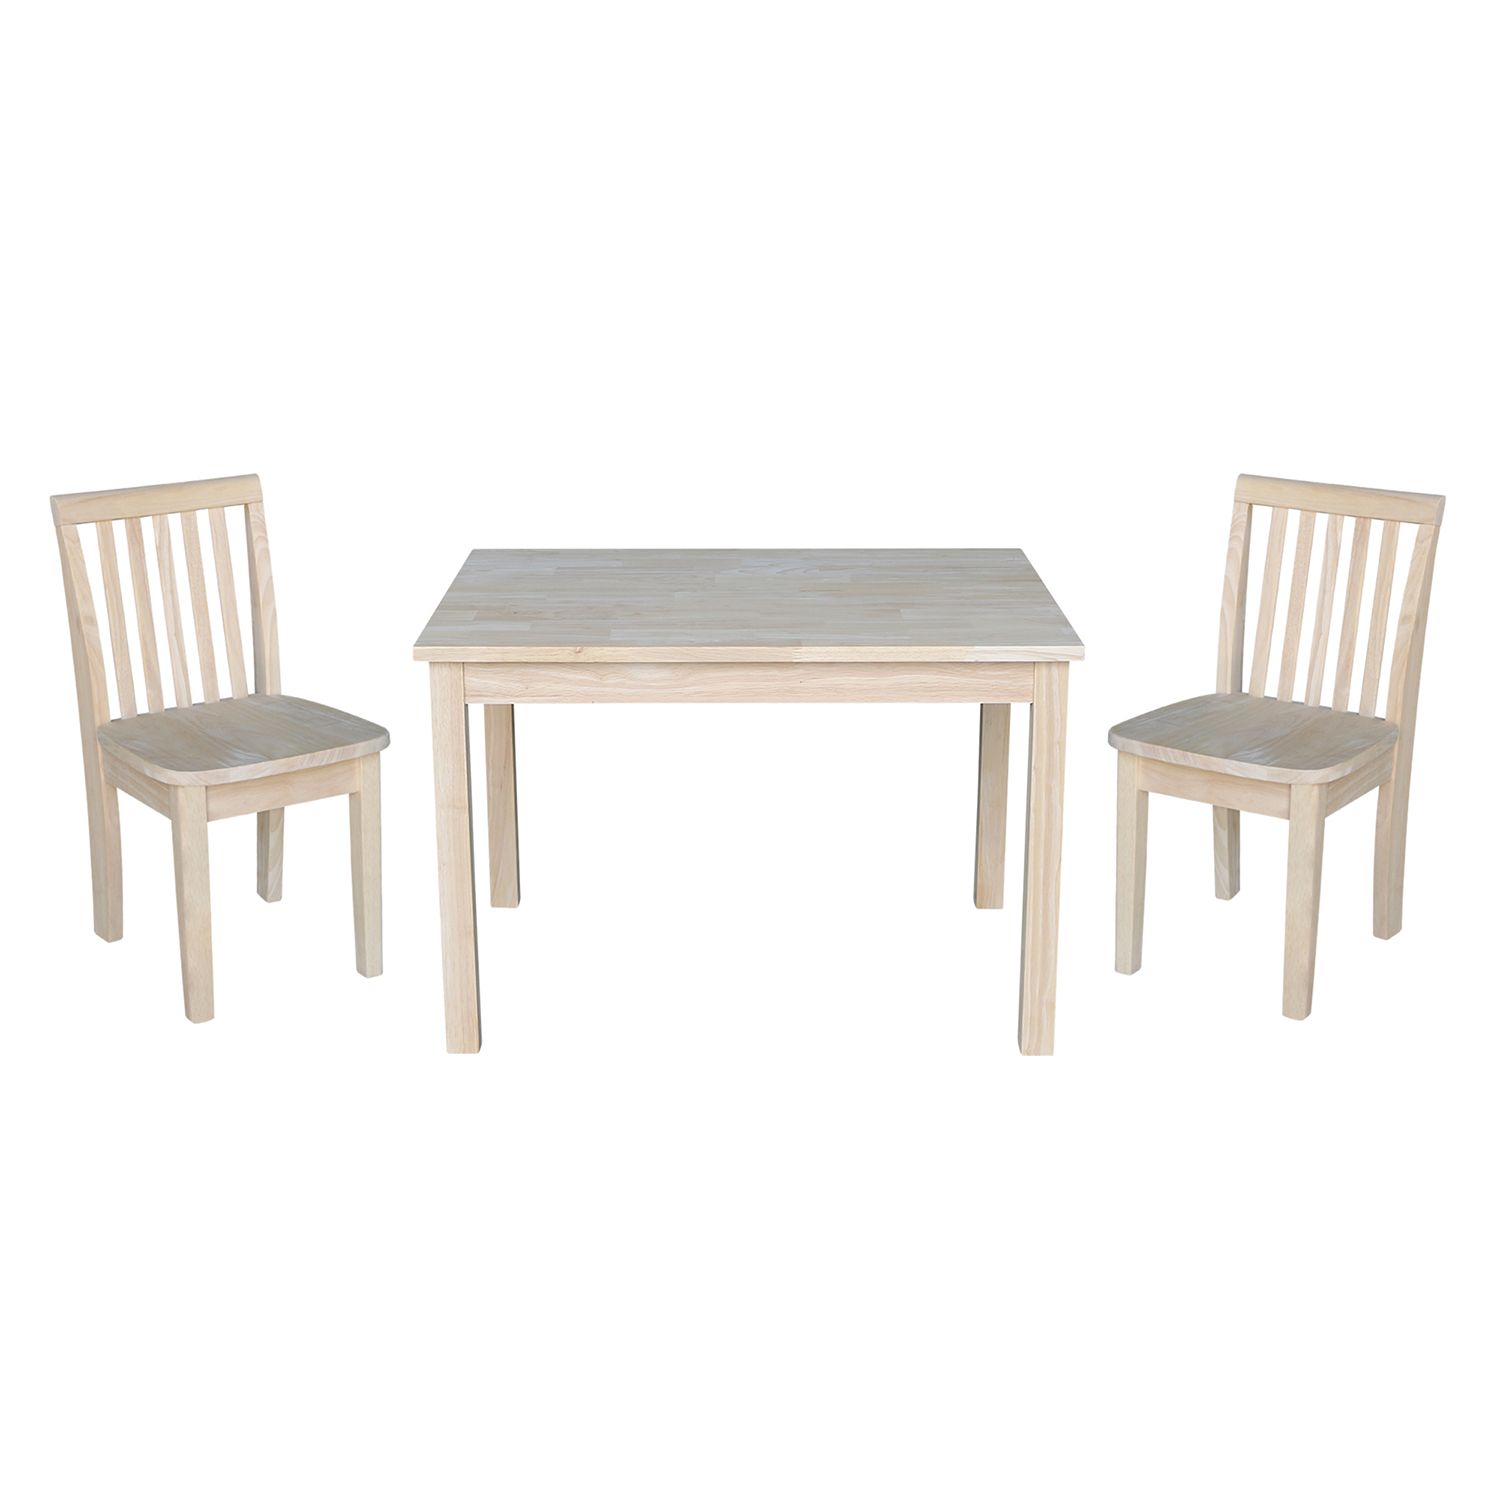 kohls kids table and chairs